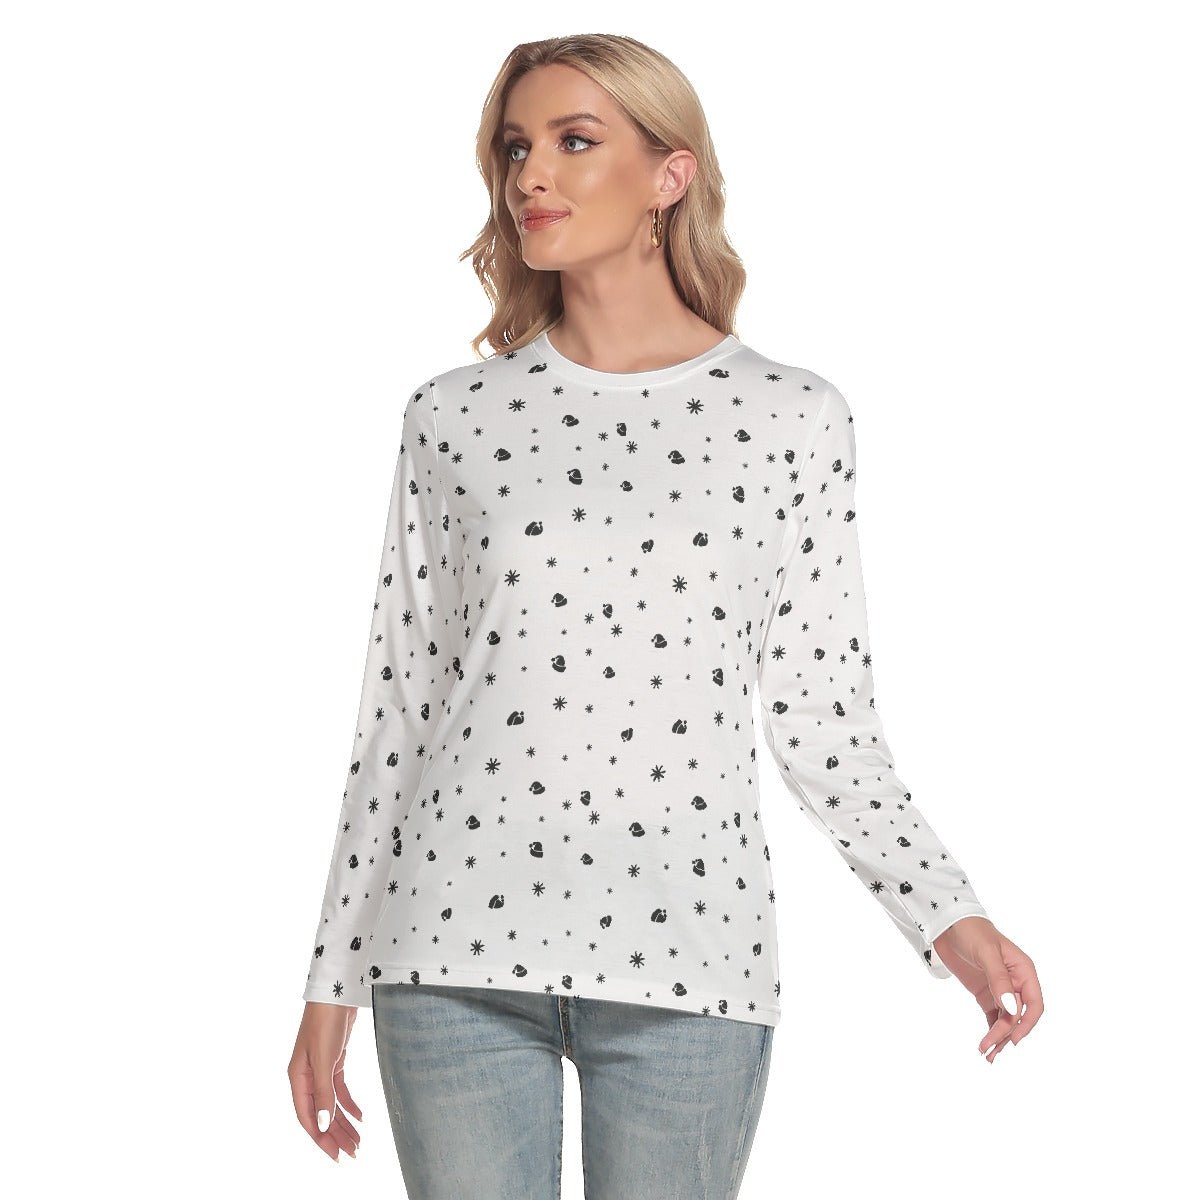 Women's Long Sleeve Christmas T-shirt - Snowflakes and Hats - Festive Style